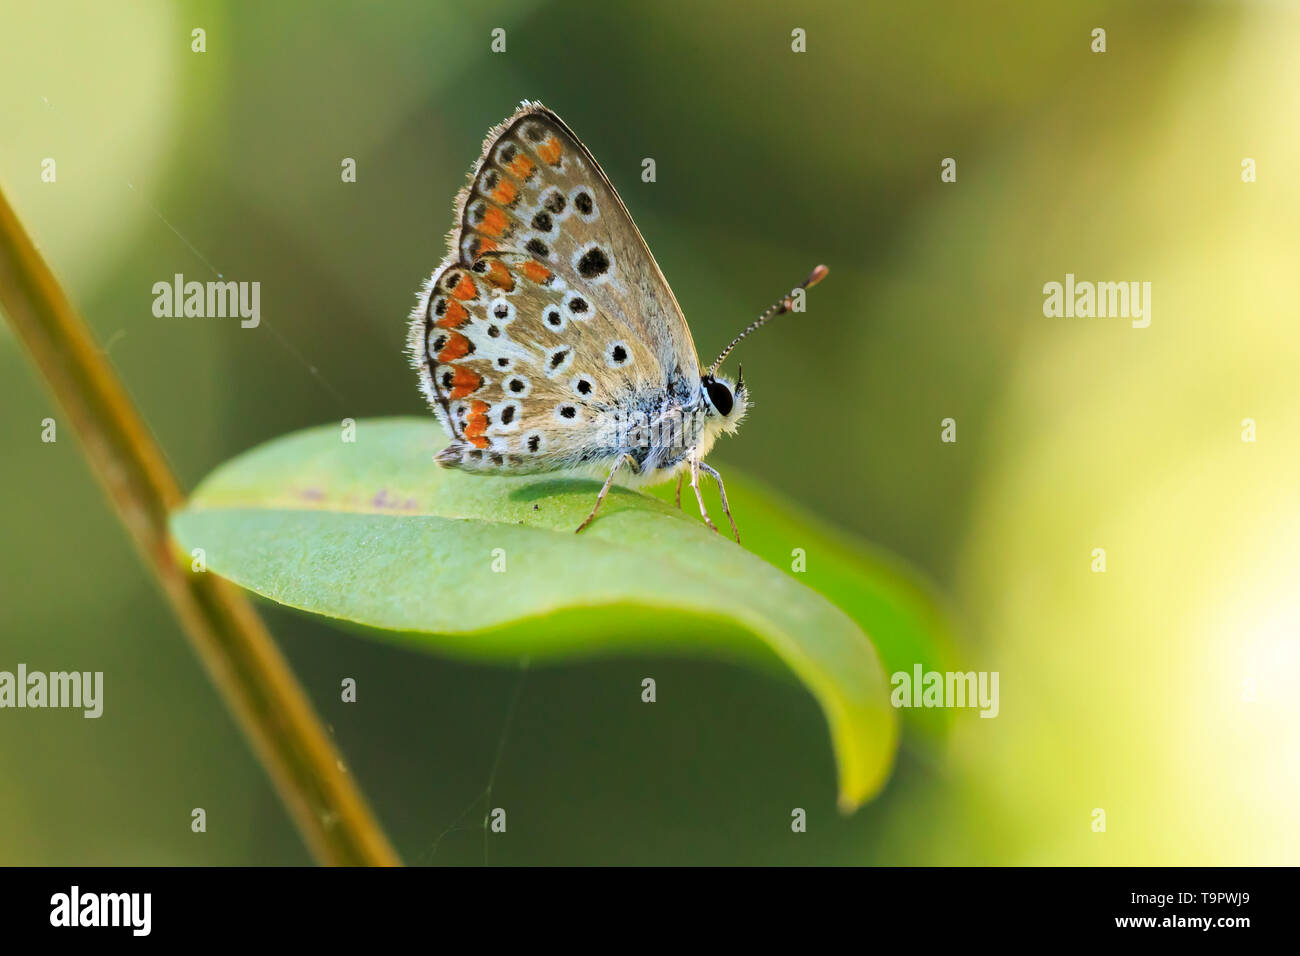 Aricia anteros, the blue argus butterfly resting in a forest Stock Photo